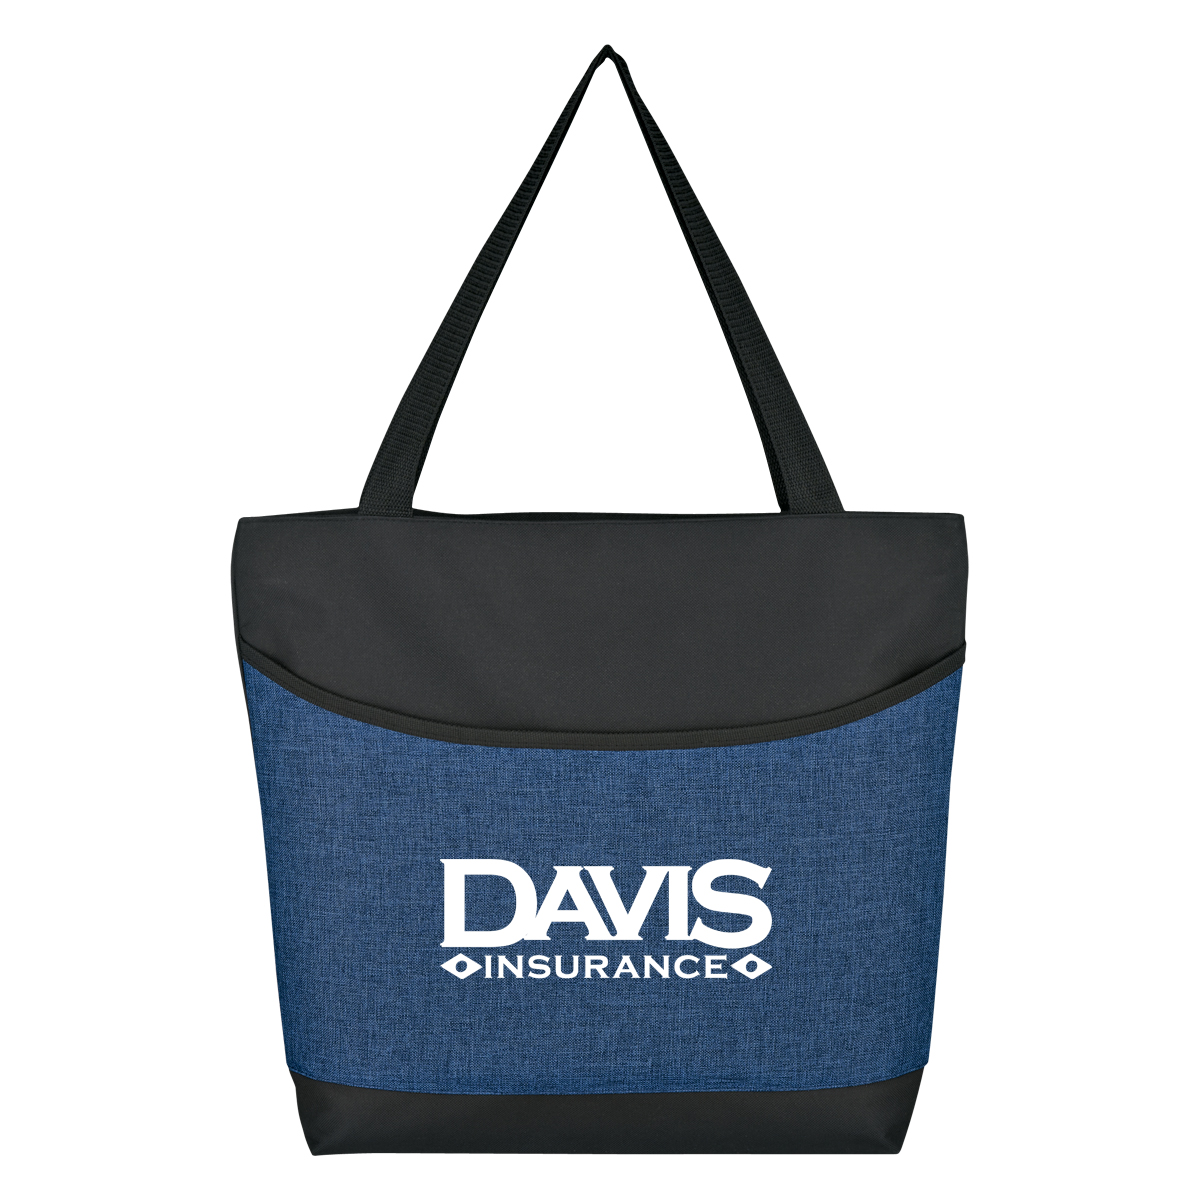 Blue Heathered Polycanvas Tote with Black Accent - 14.75